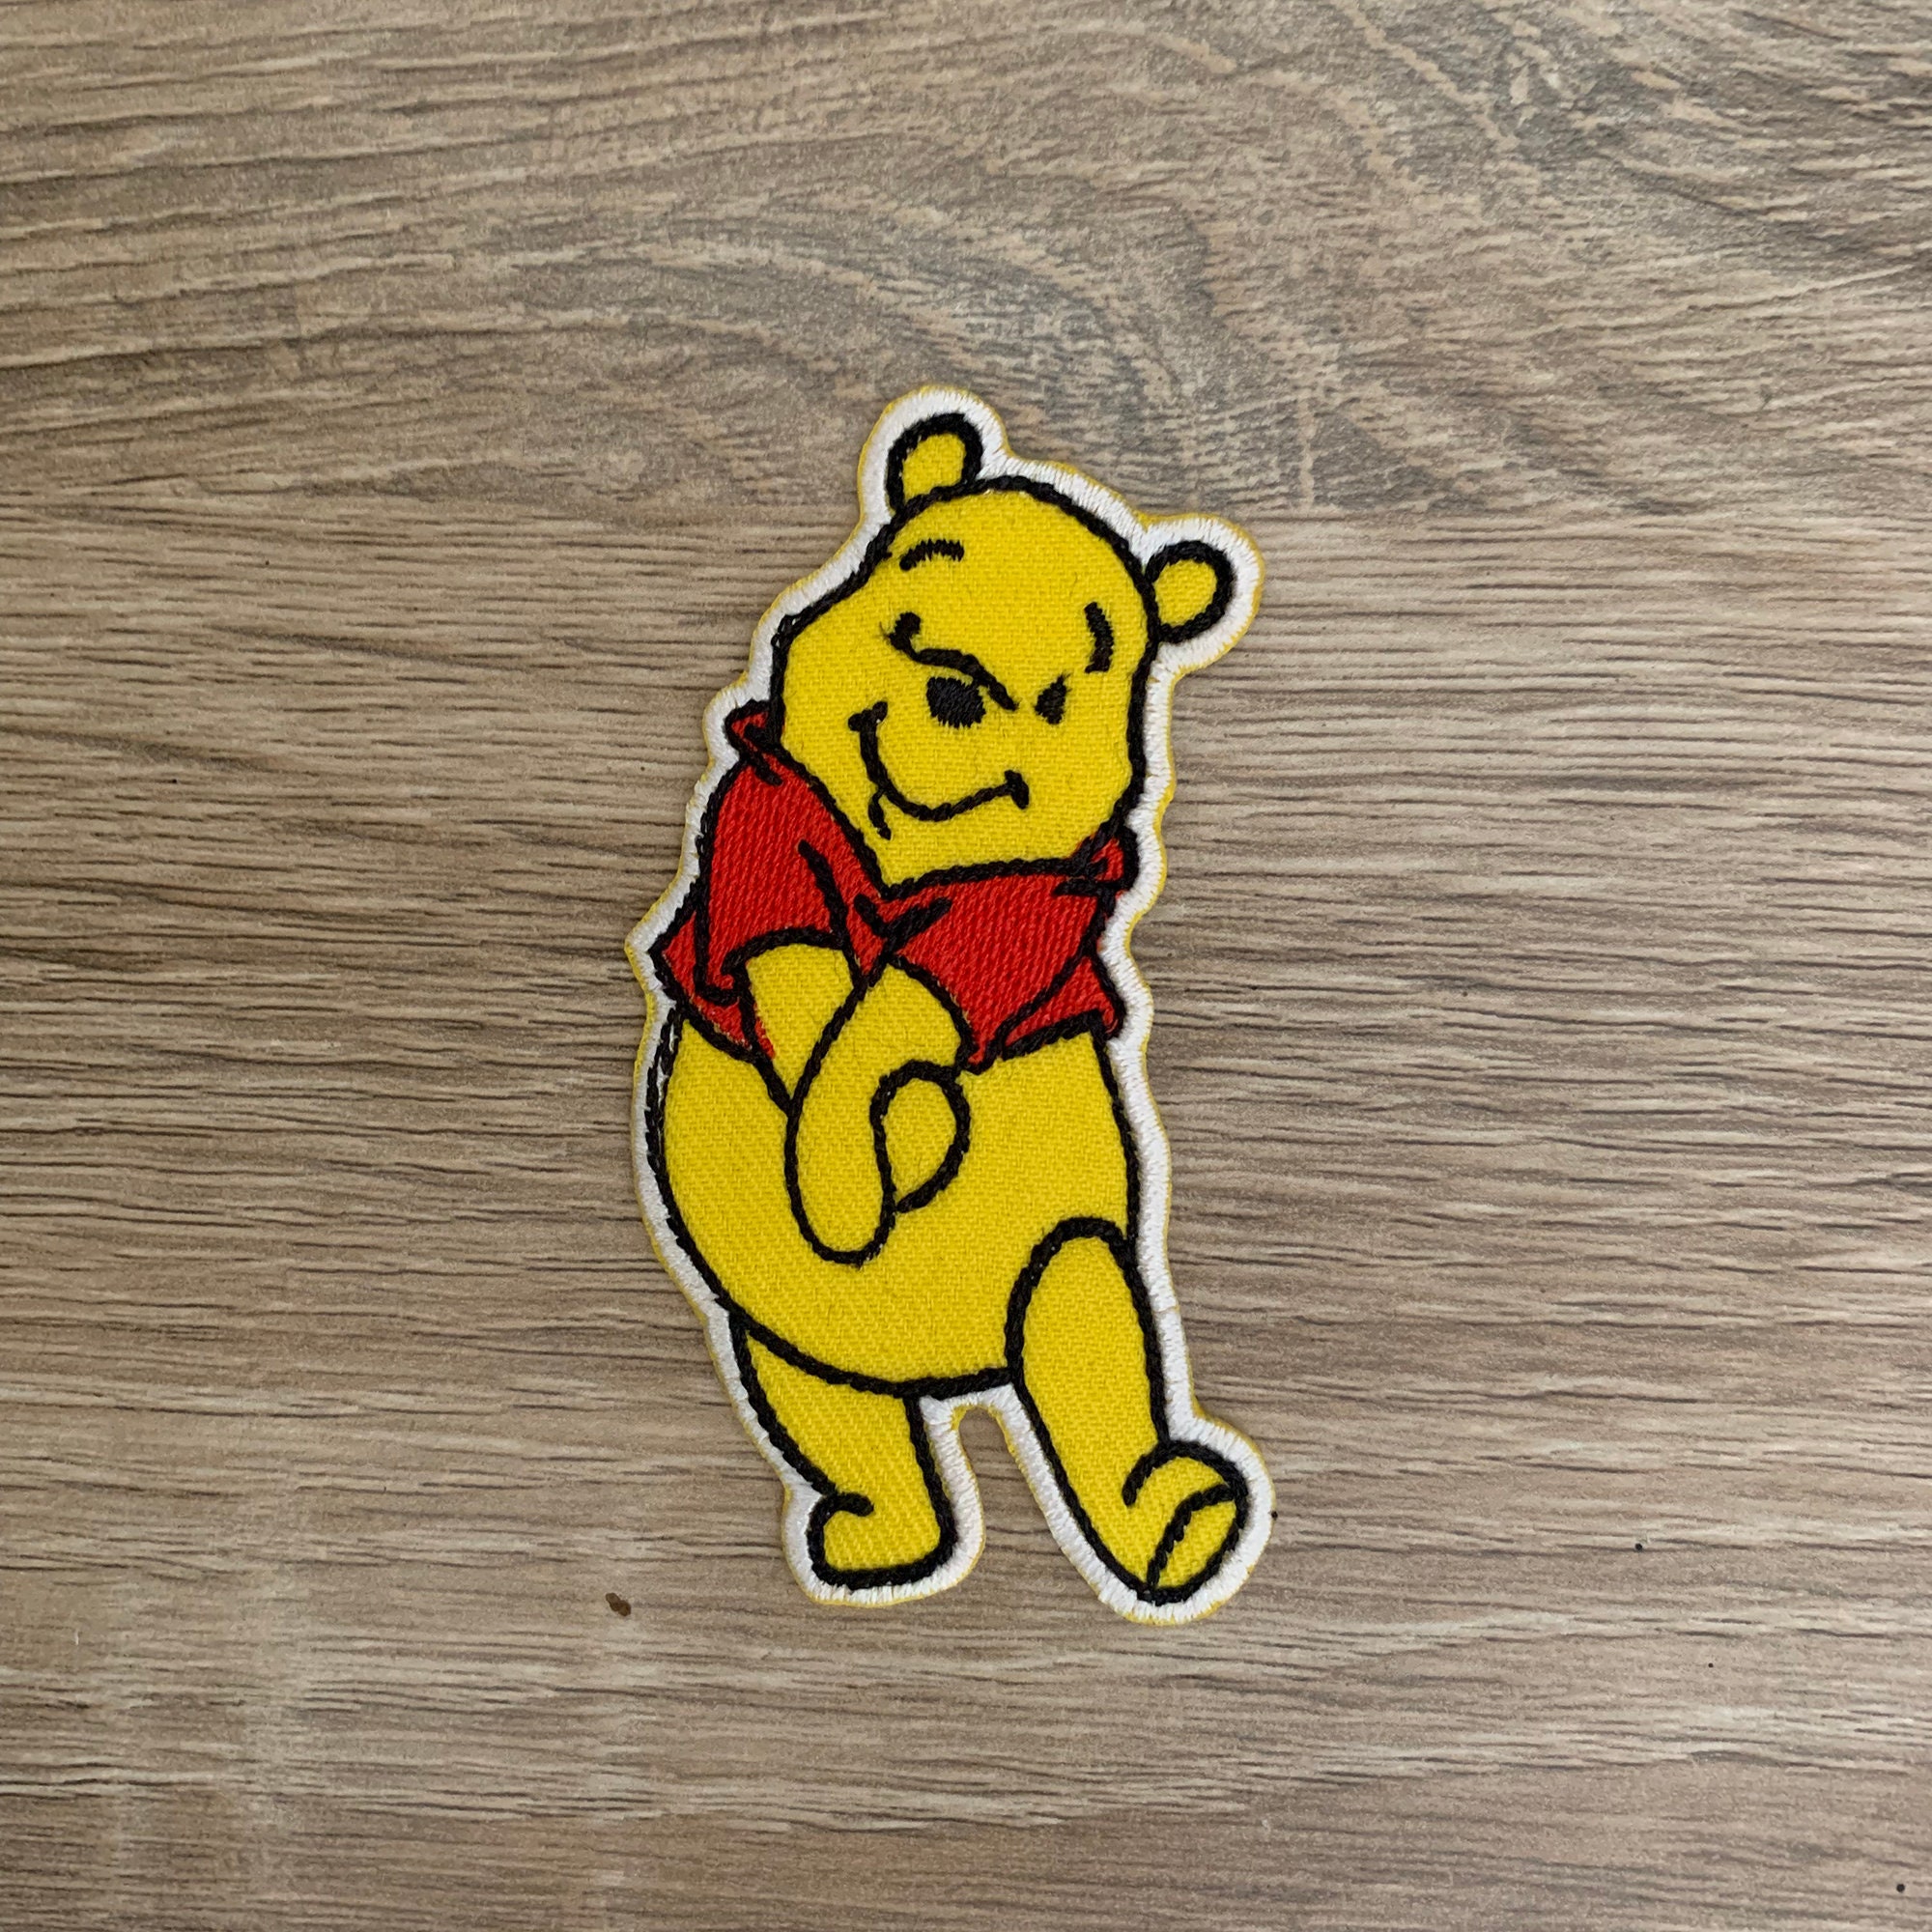 Exclusive Winnie the Pooh Iron-on Patch 